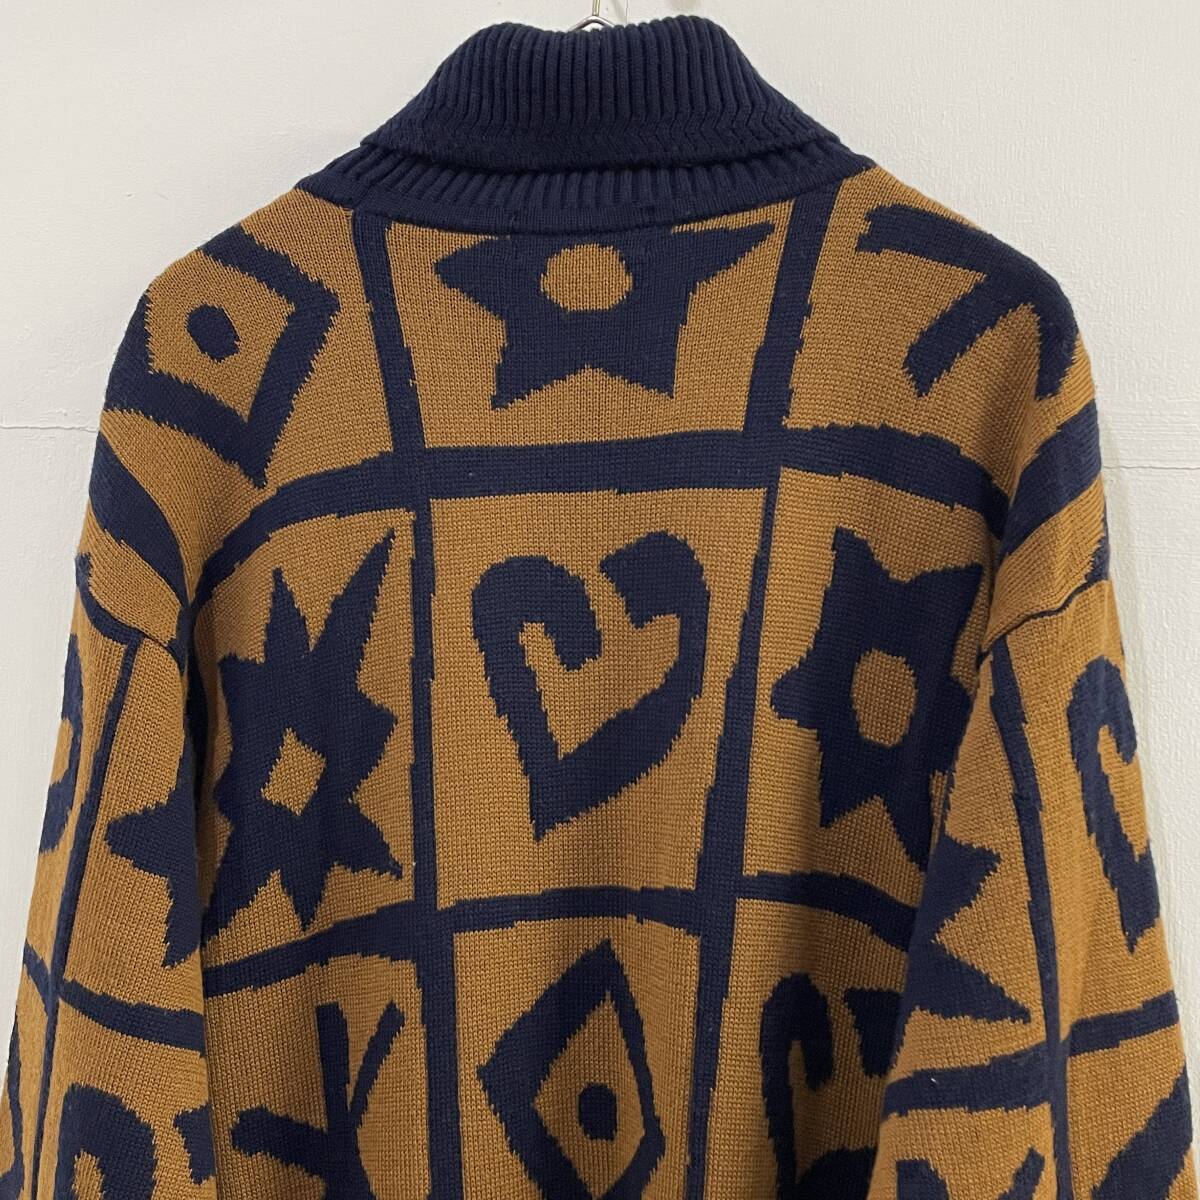 *YVES SAINT LAURENTivu* sun rolan VINTAGE total pattern geometrical pattern ta-toru neck knitted sweater tea × navy blue size L[ uniform carriage / including in a package possibility ]G